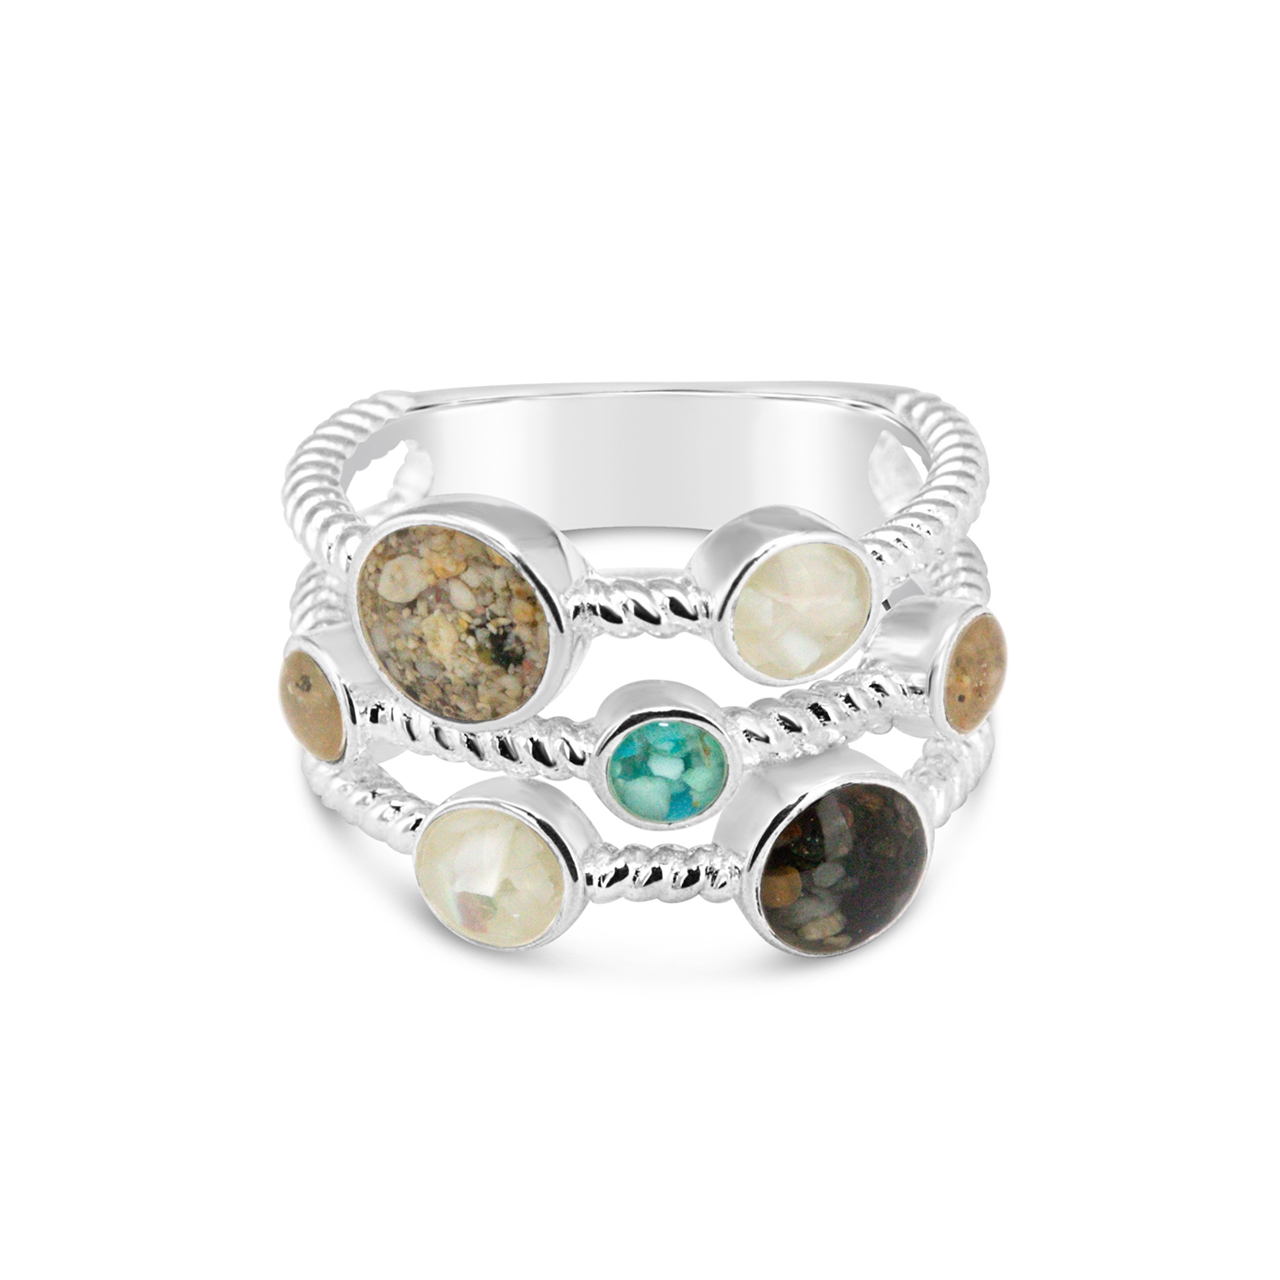 Sterling silver multi-bezel ring with rope texture that includes your choice of 7 sand or earth elements. The perfect Valentine's gift.